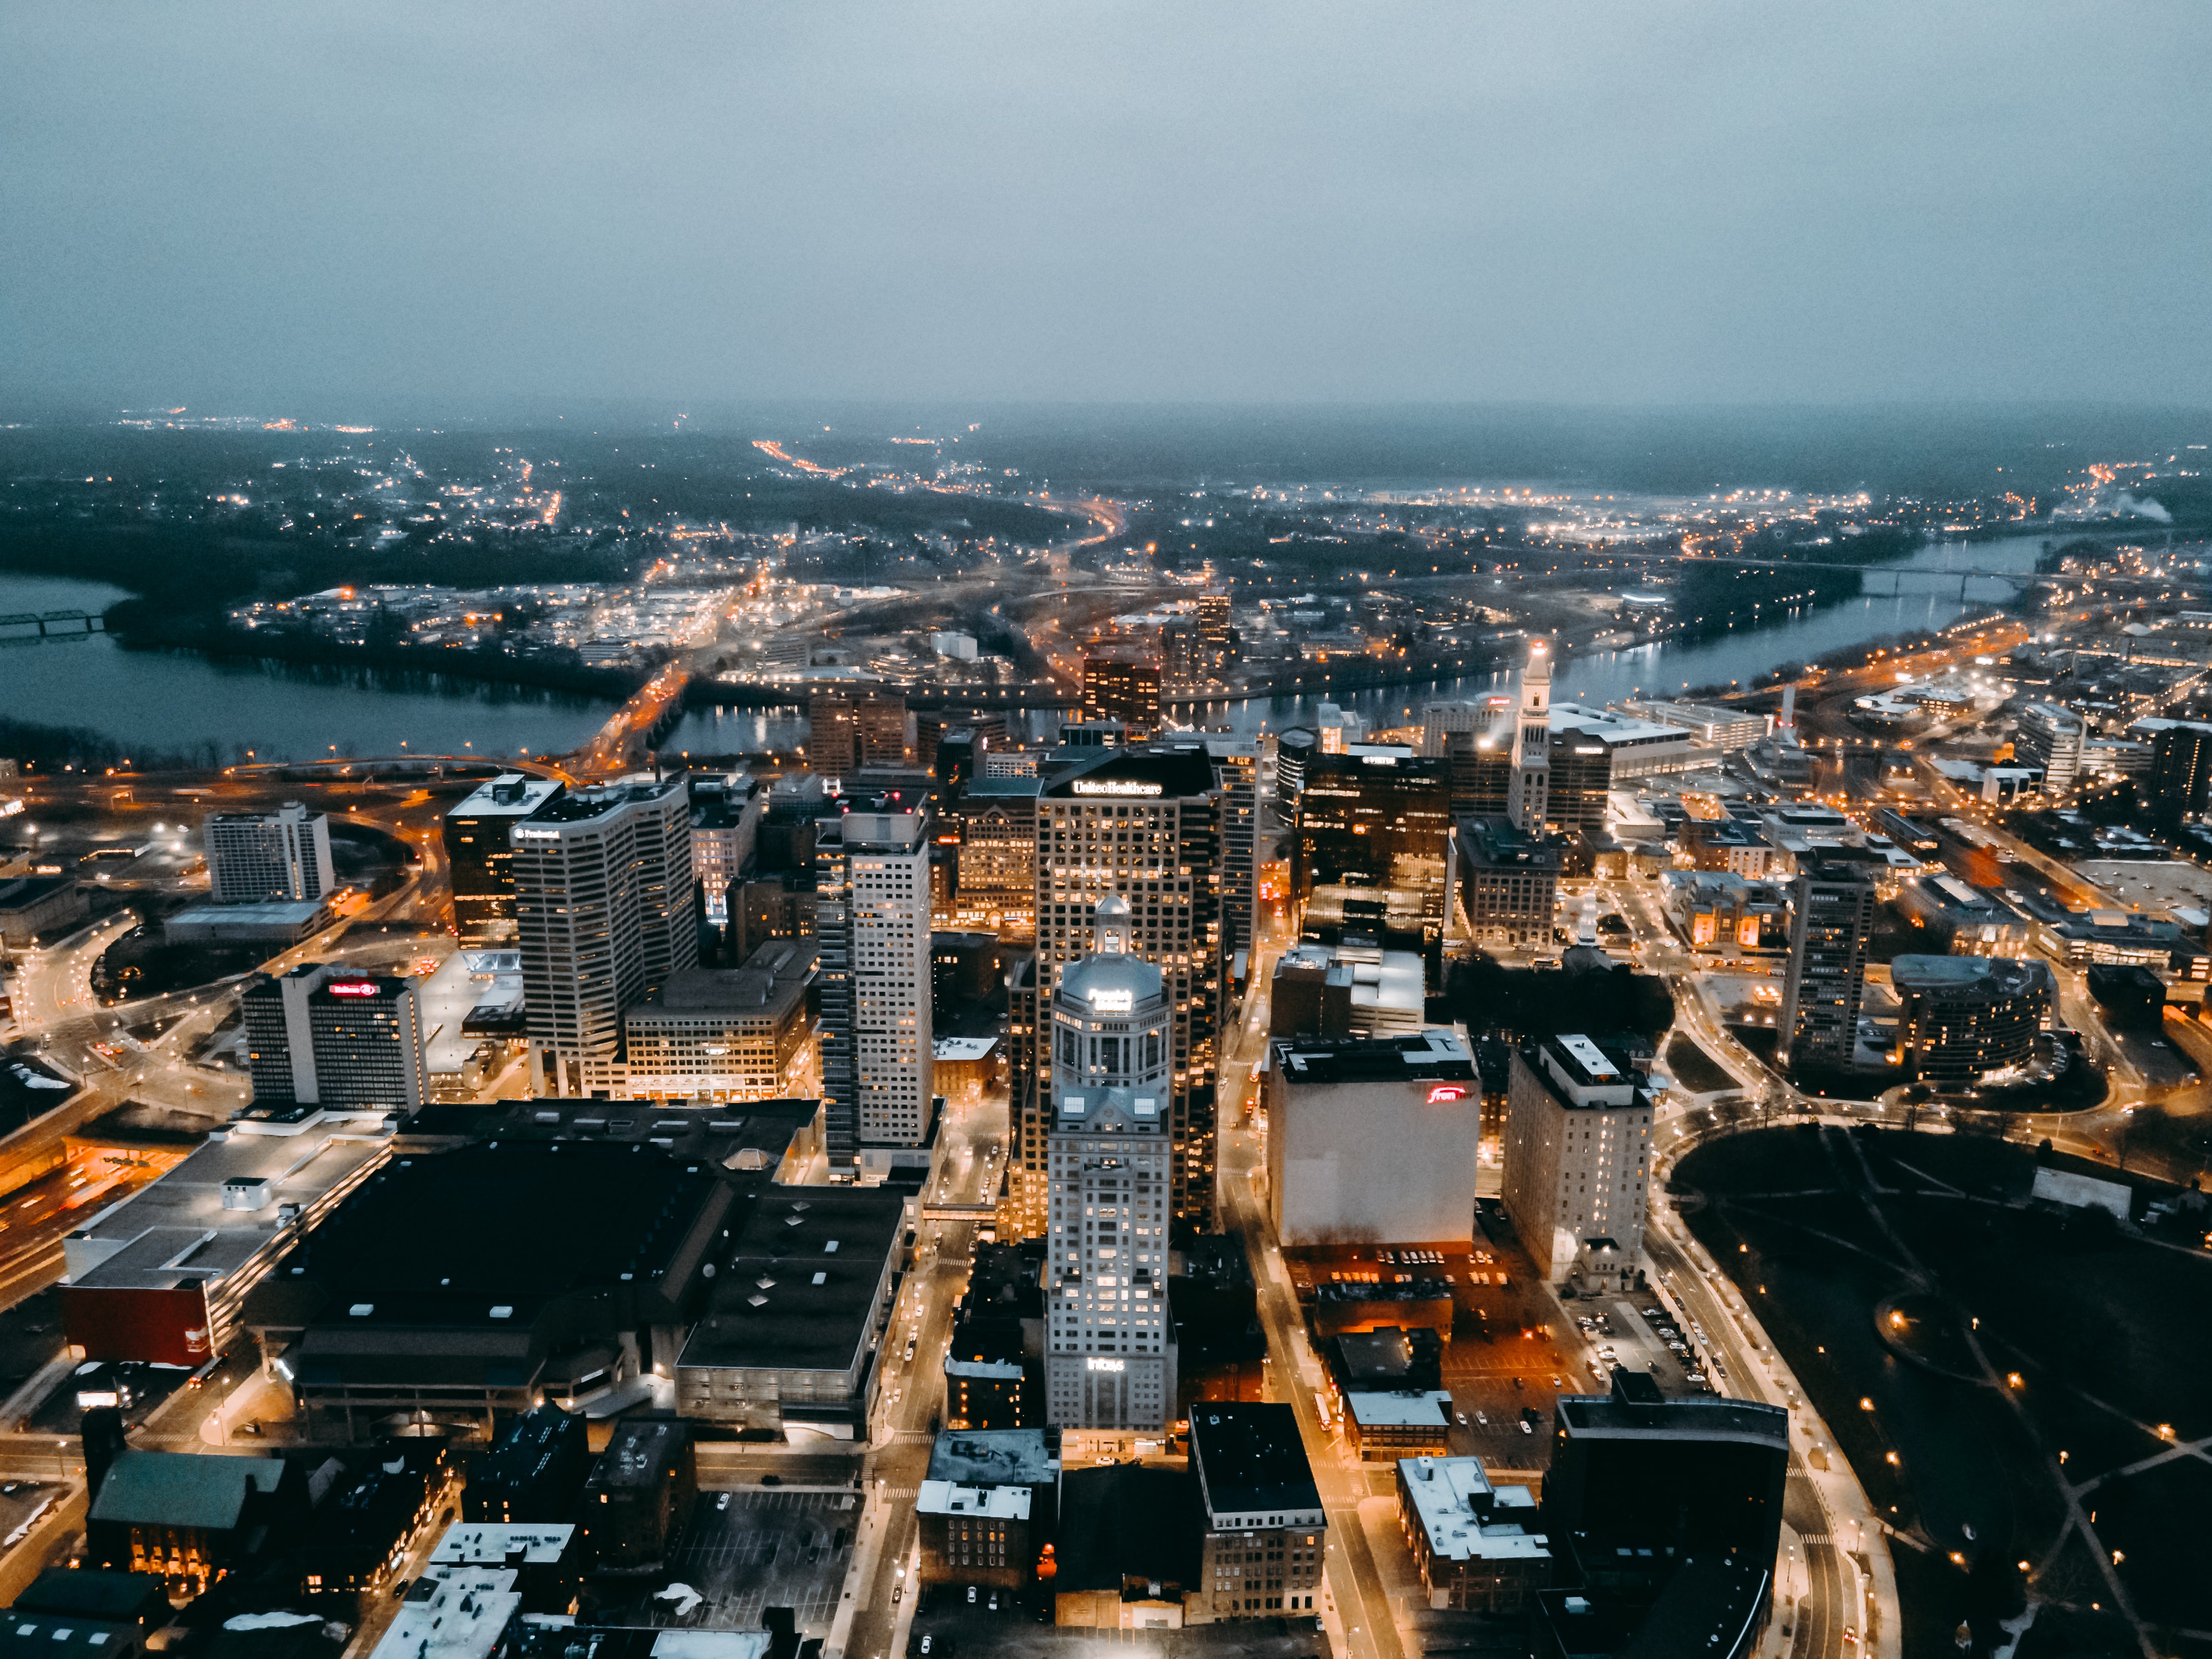 rivers, cities, view from above, city, lights, building, horizon